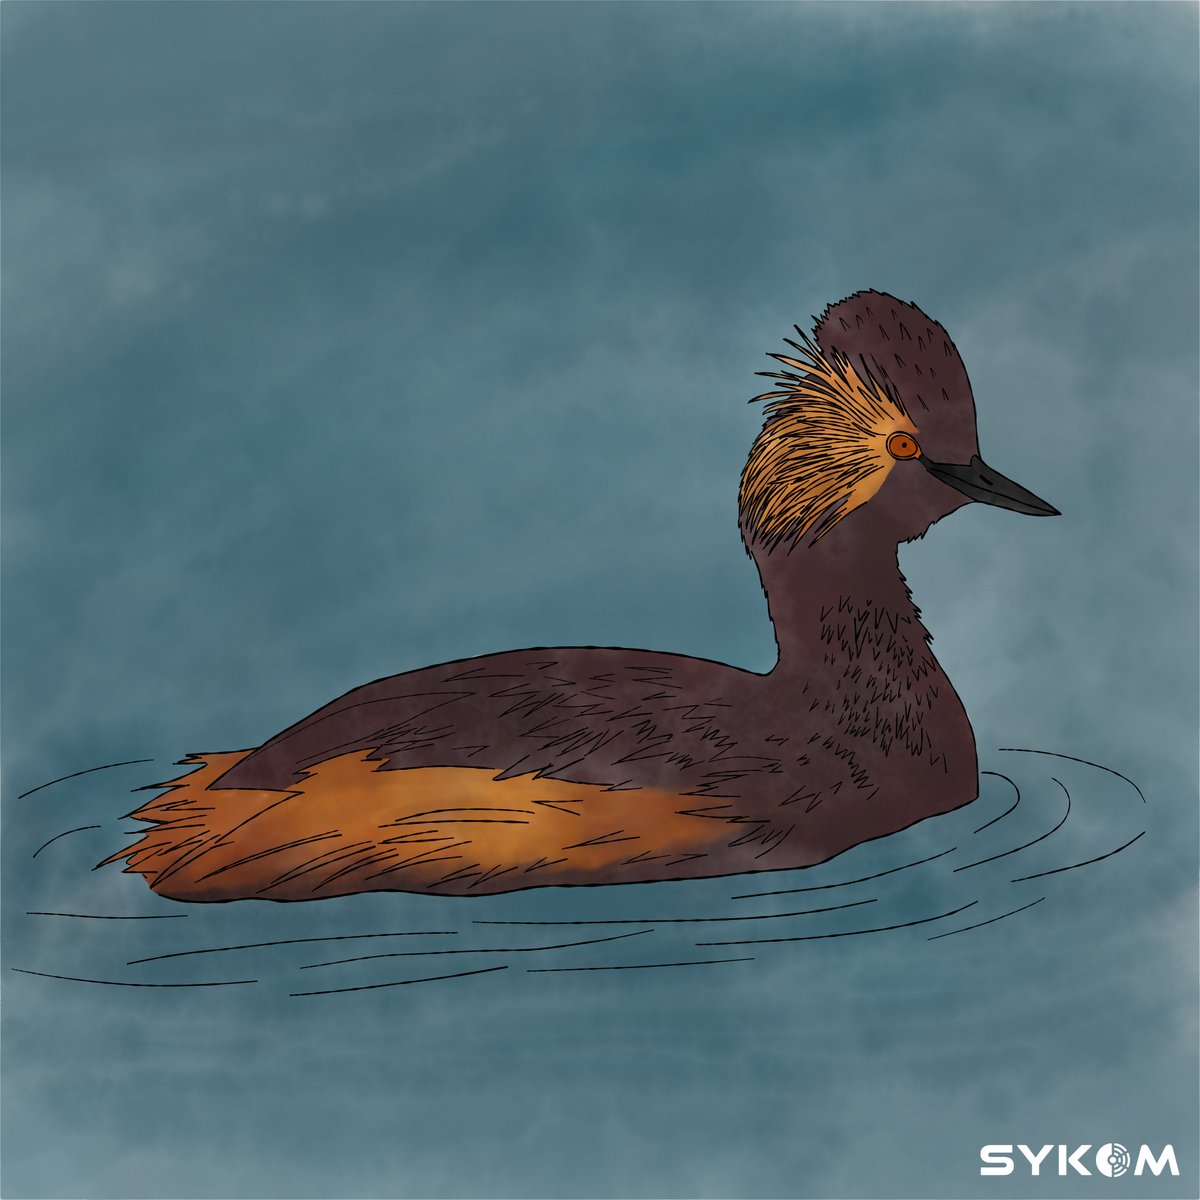 The Eared Grebe has the record for the longest flightless downtime of any bird that can fly. When they get to their migration destination they double in weight and shrink their flight muscles so they physically can not fly. When they need to migrate again, the process reverses.